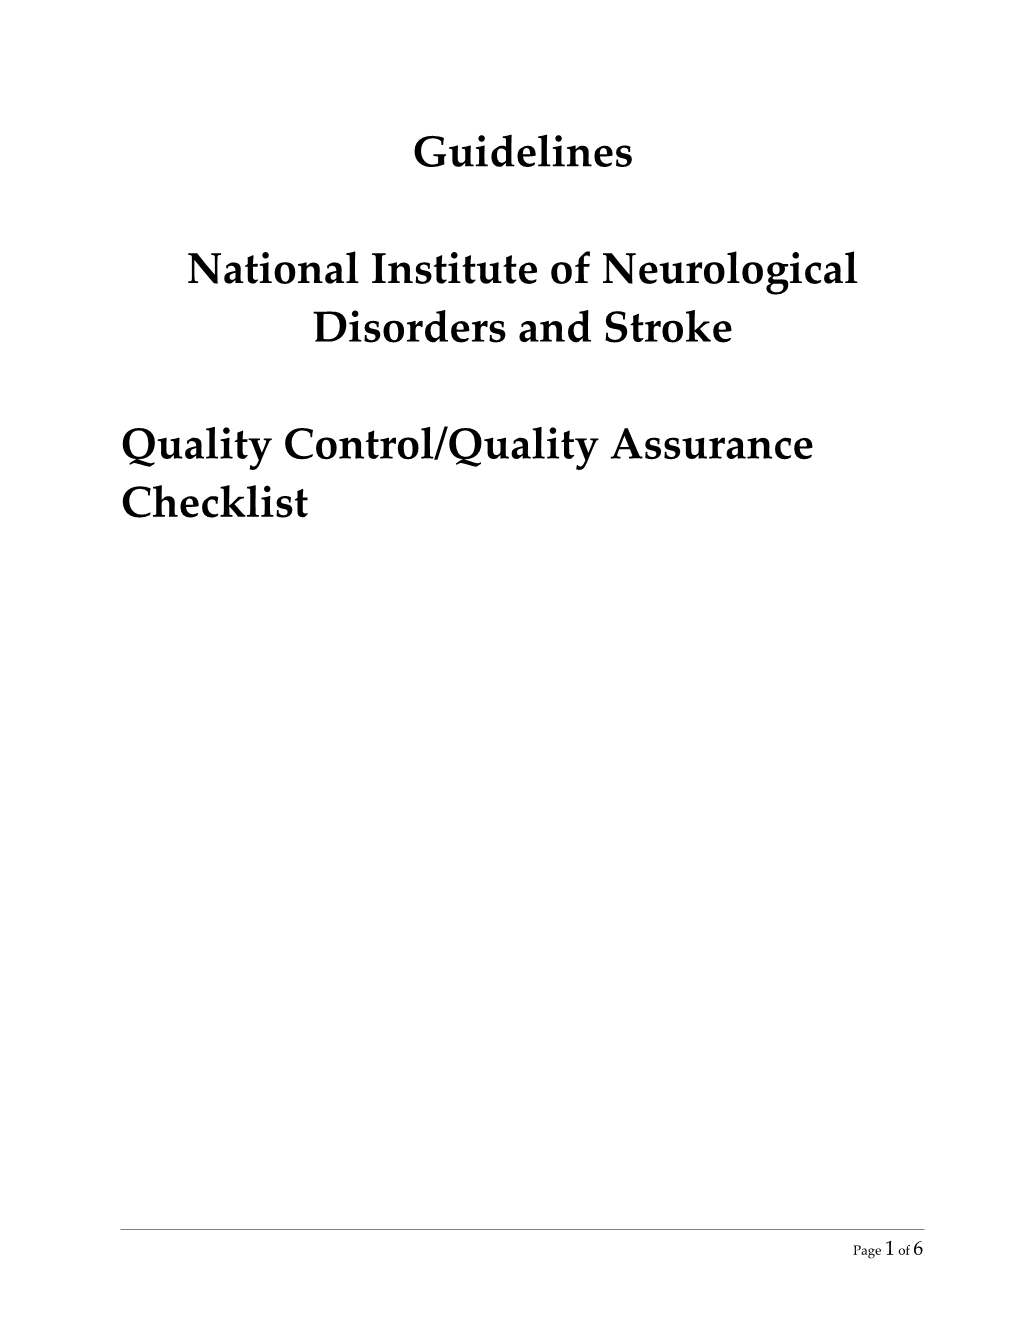 Process Checklist for Ninds Clinical Studies